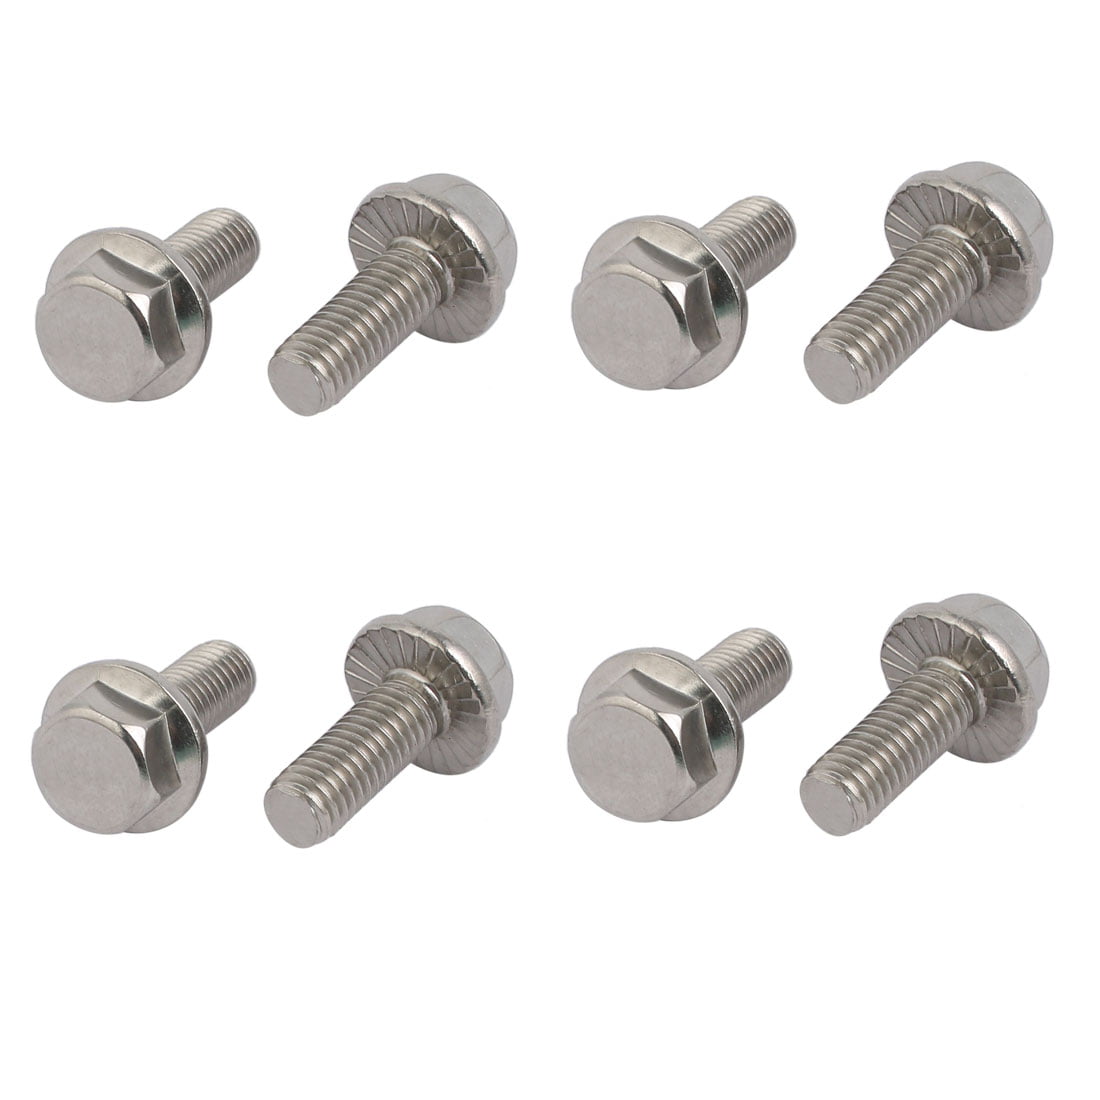 8 Pieces M8*30 Hex Cap Serrated Flange Bolt 304 Stainless Steel 